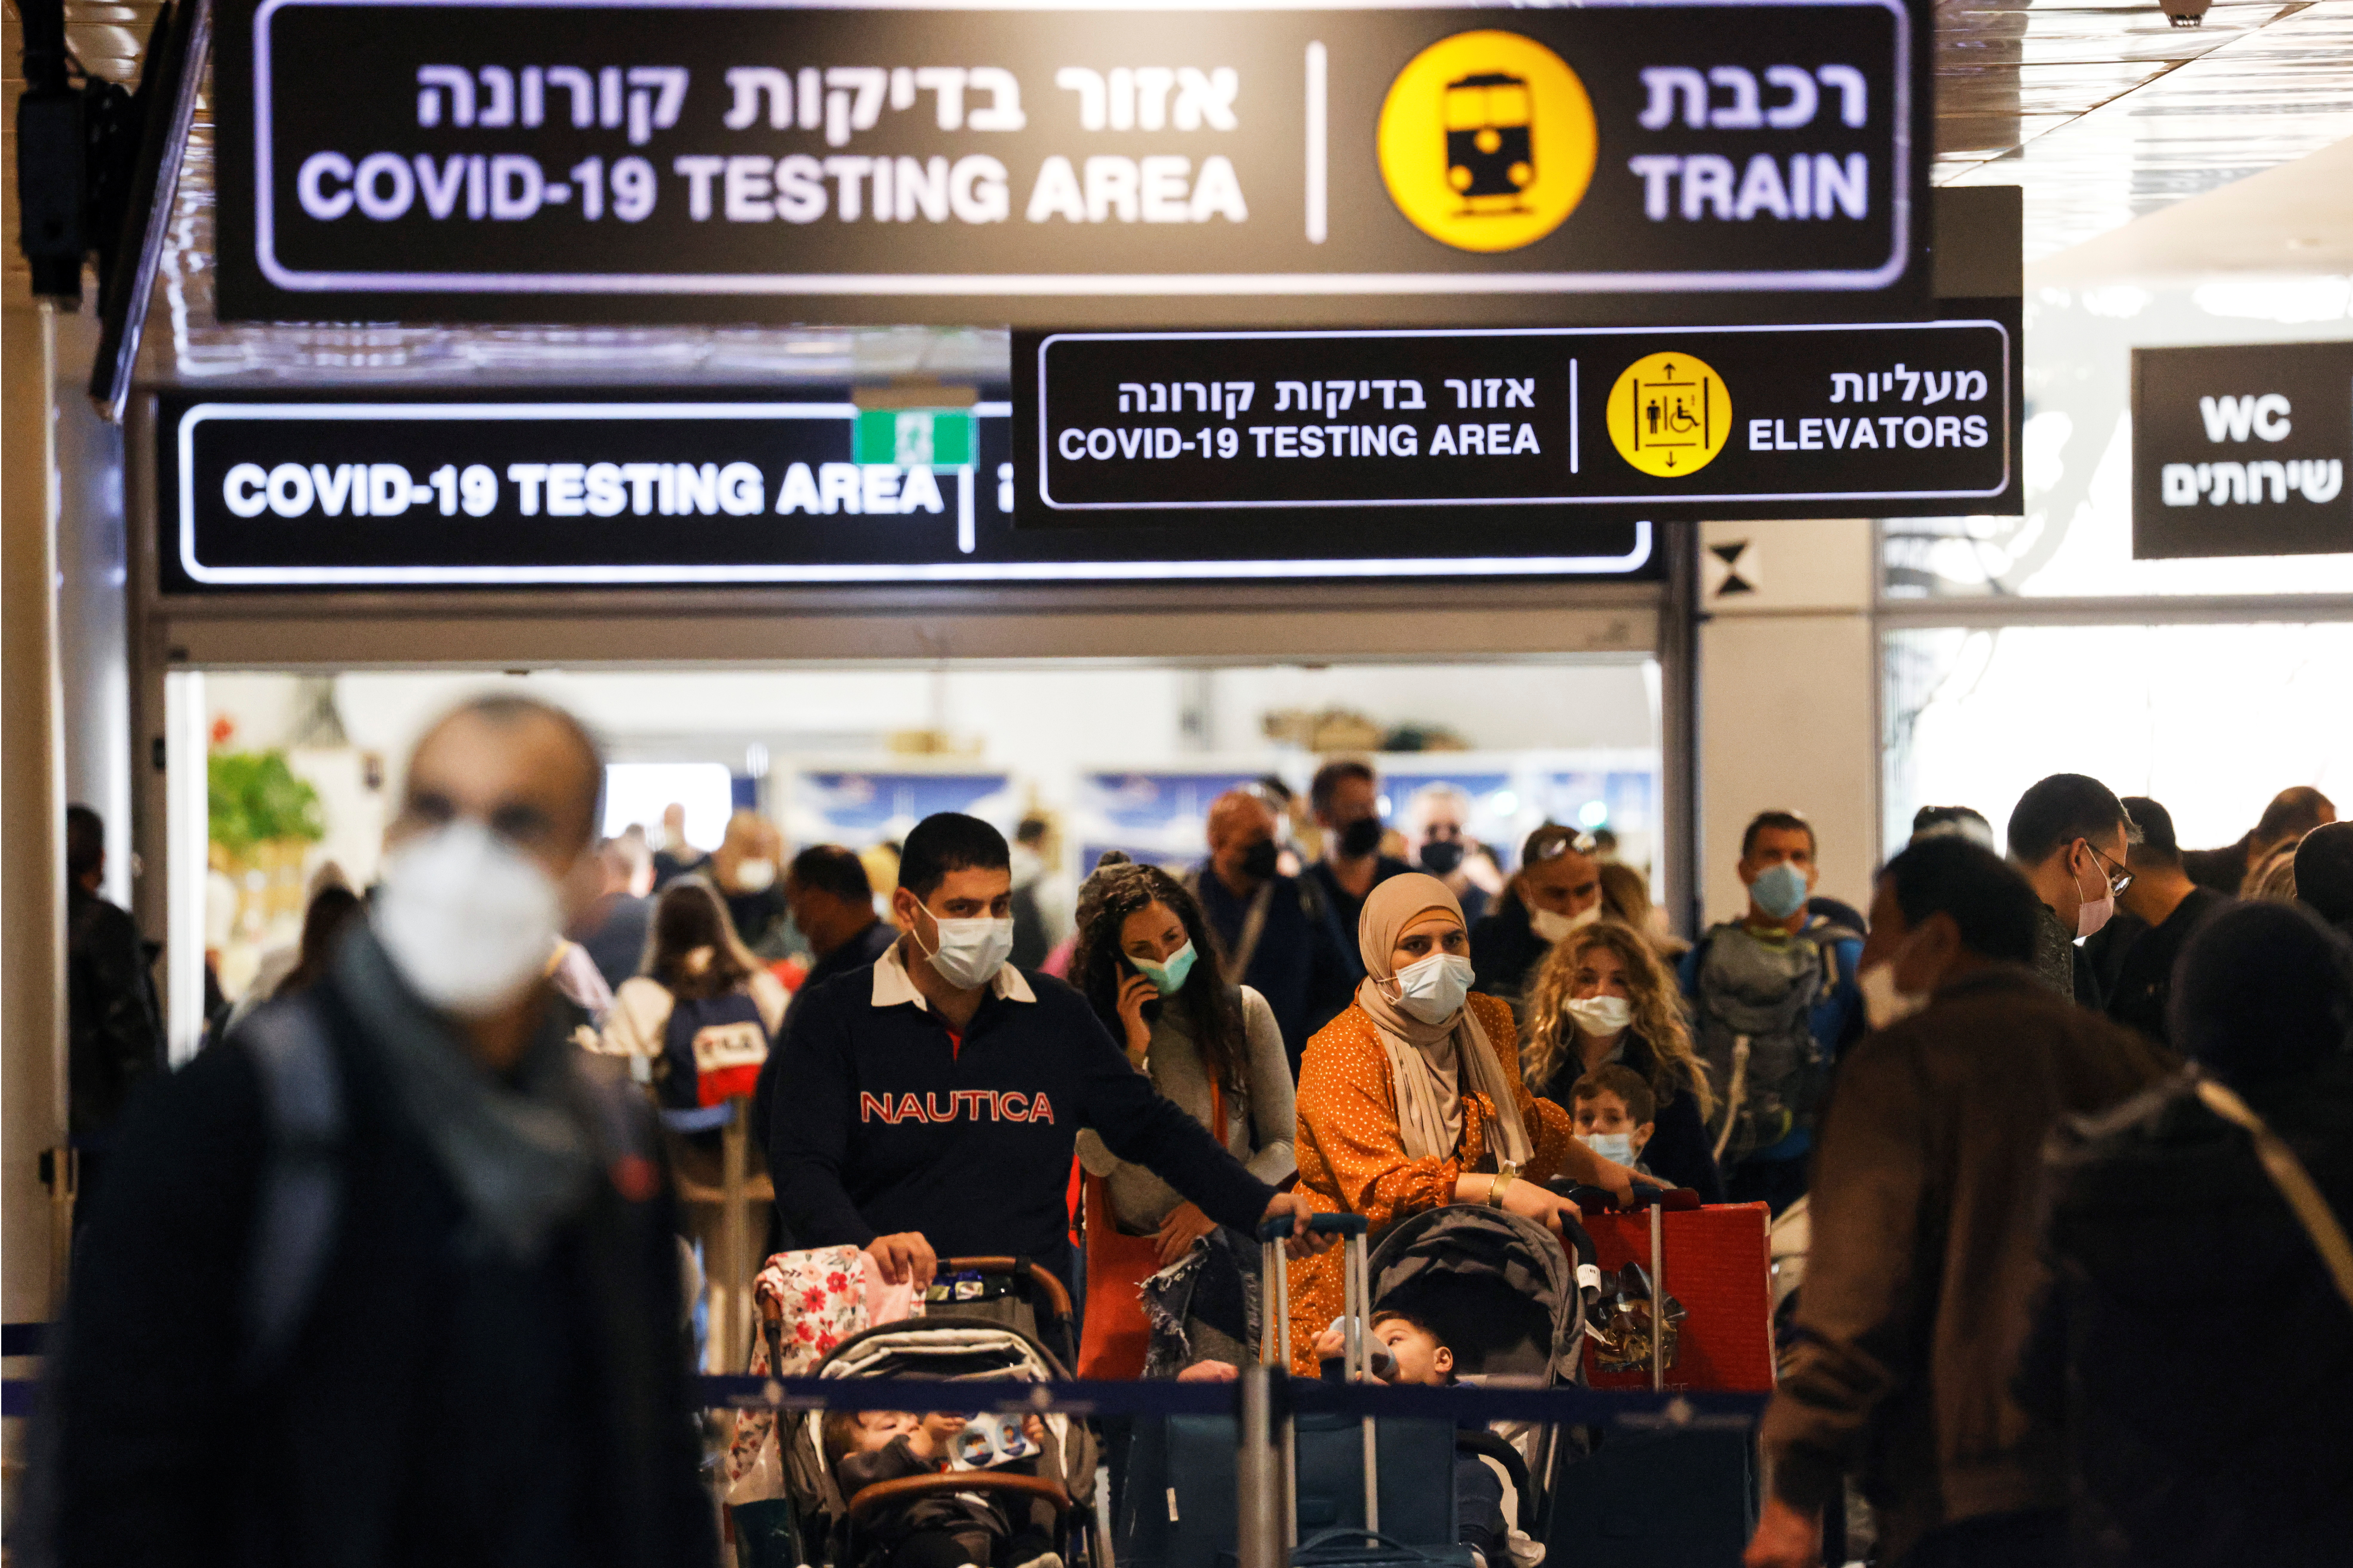 Travellers exit the coronavirus disease (COVID-19) pandemic testing area at Ben Gurion International Airport as Israel imposes new restrictions